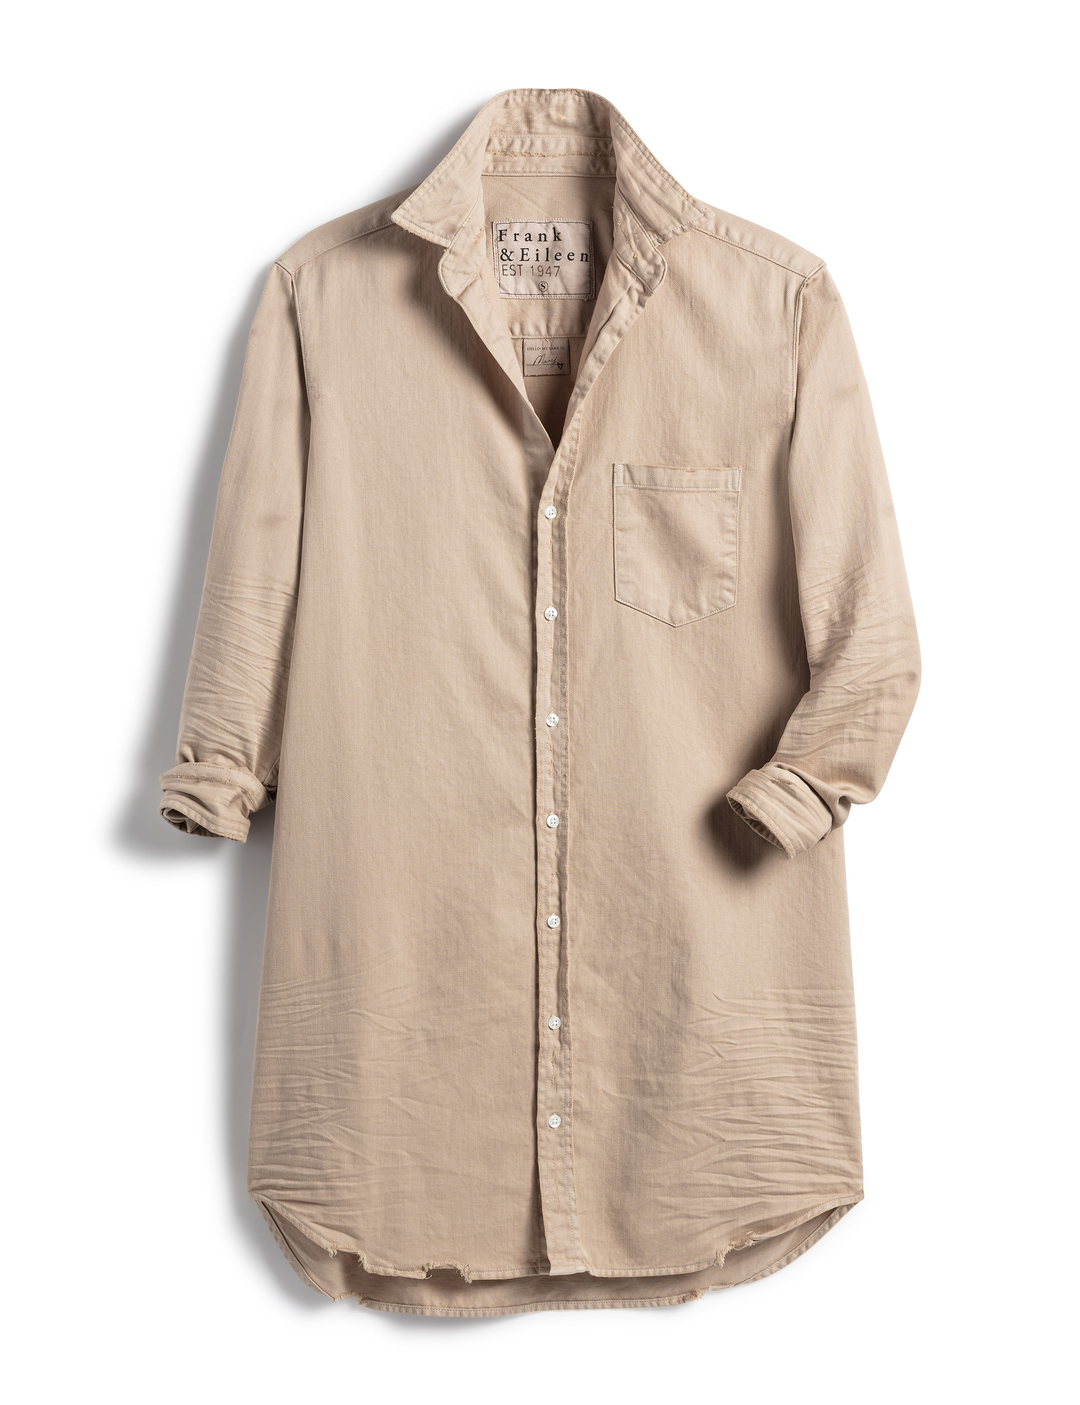 Frank & Eileen - Mary Woven Button Up Dress in Sand Tattered Denim